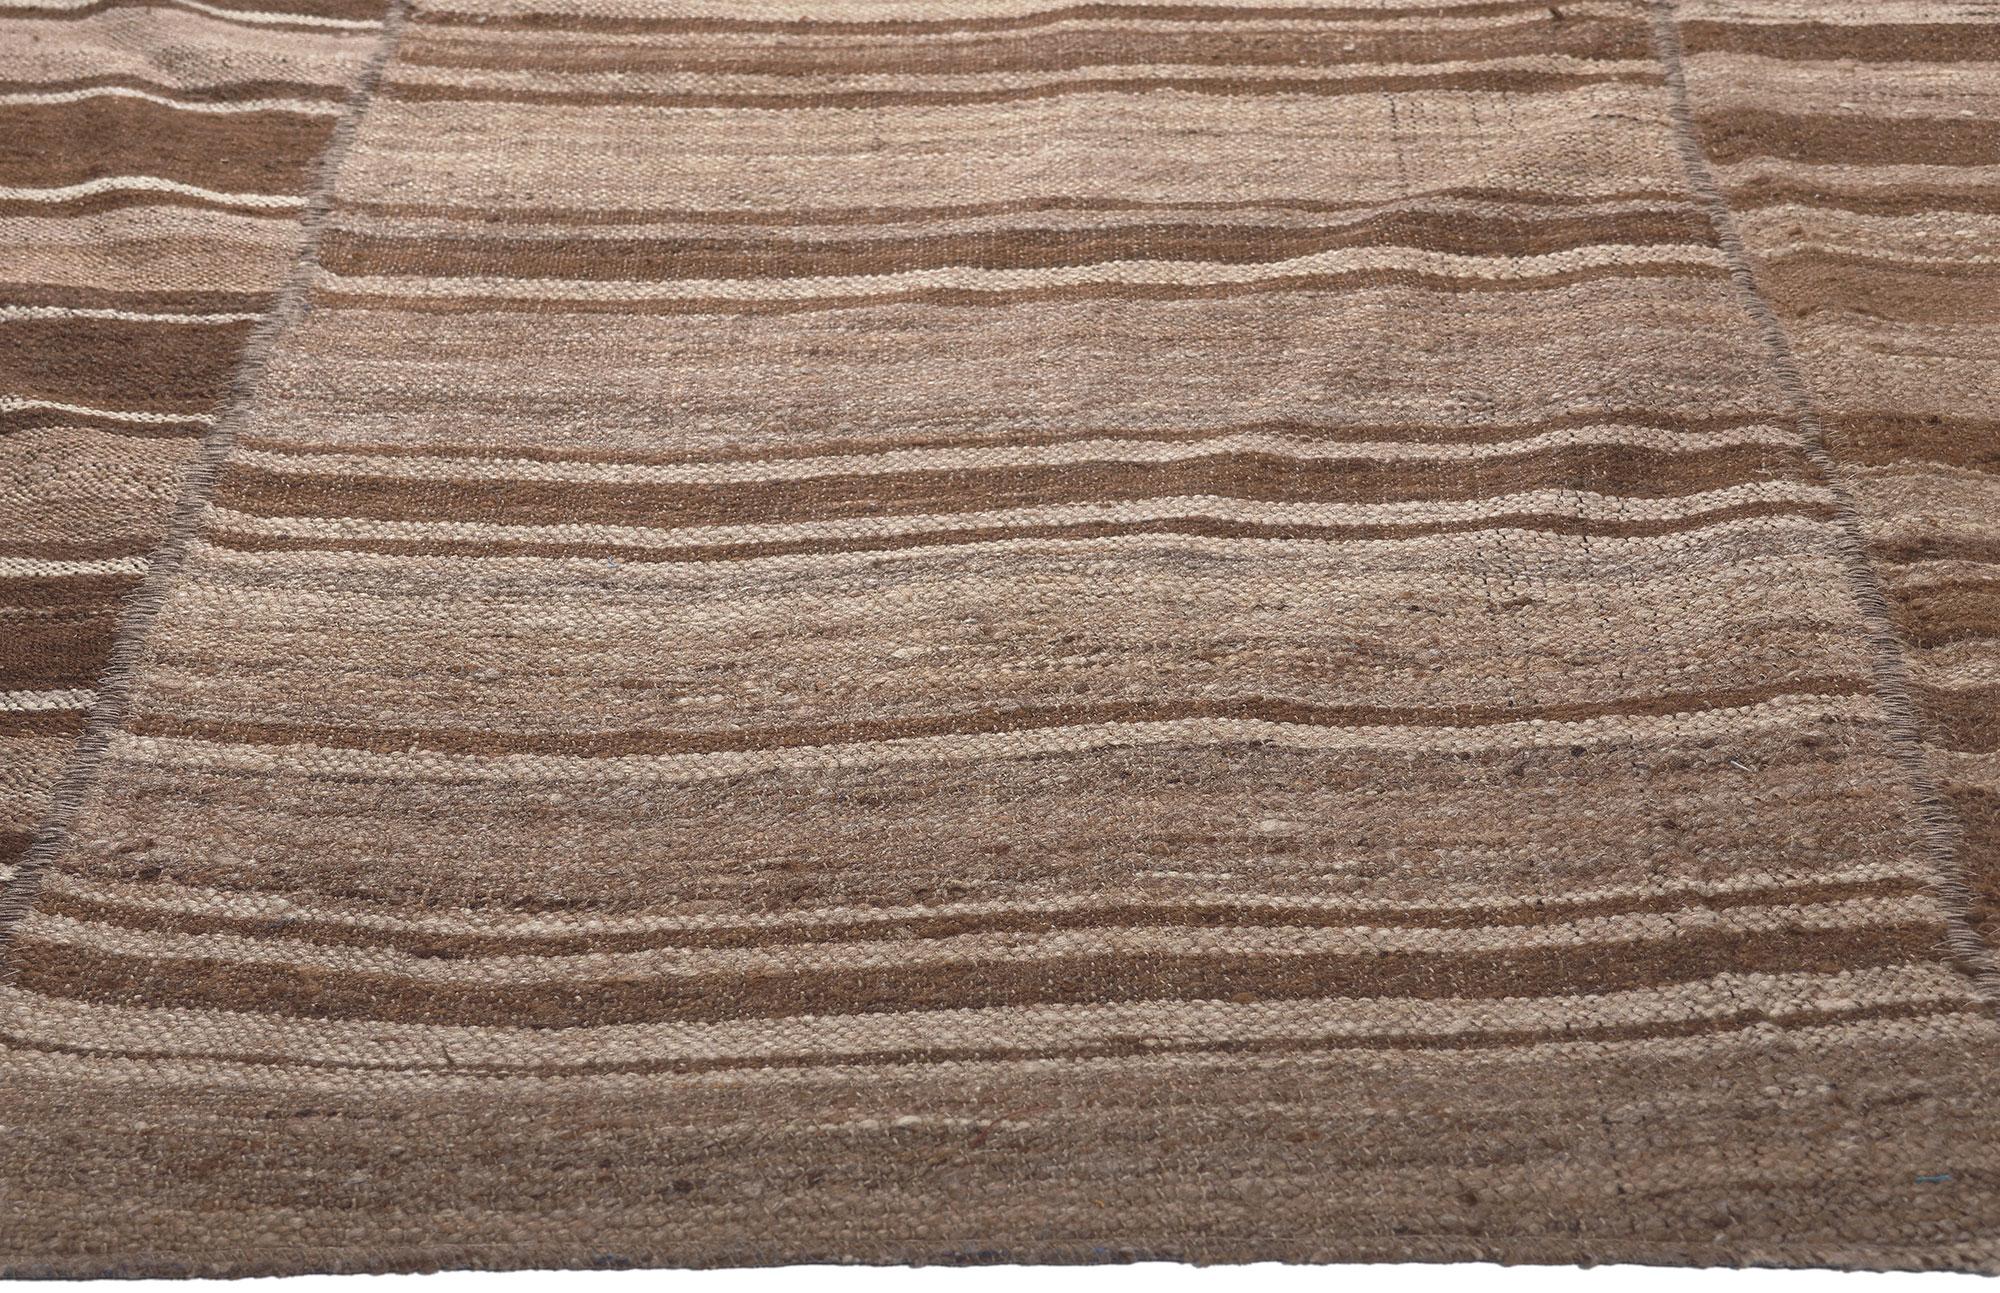 Earth-Tone Vintage Turkish Kilim Rug, Wabi-Sabi Embraces Sustainable Design In Good Condition For Sale In Dallas, TX